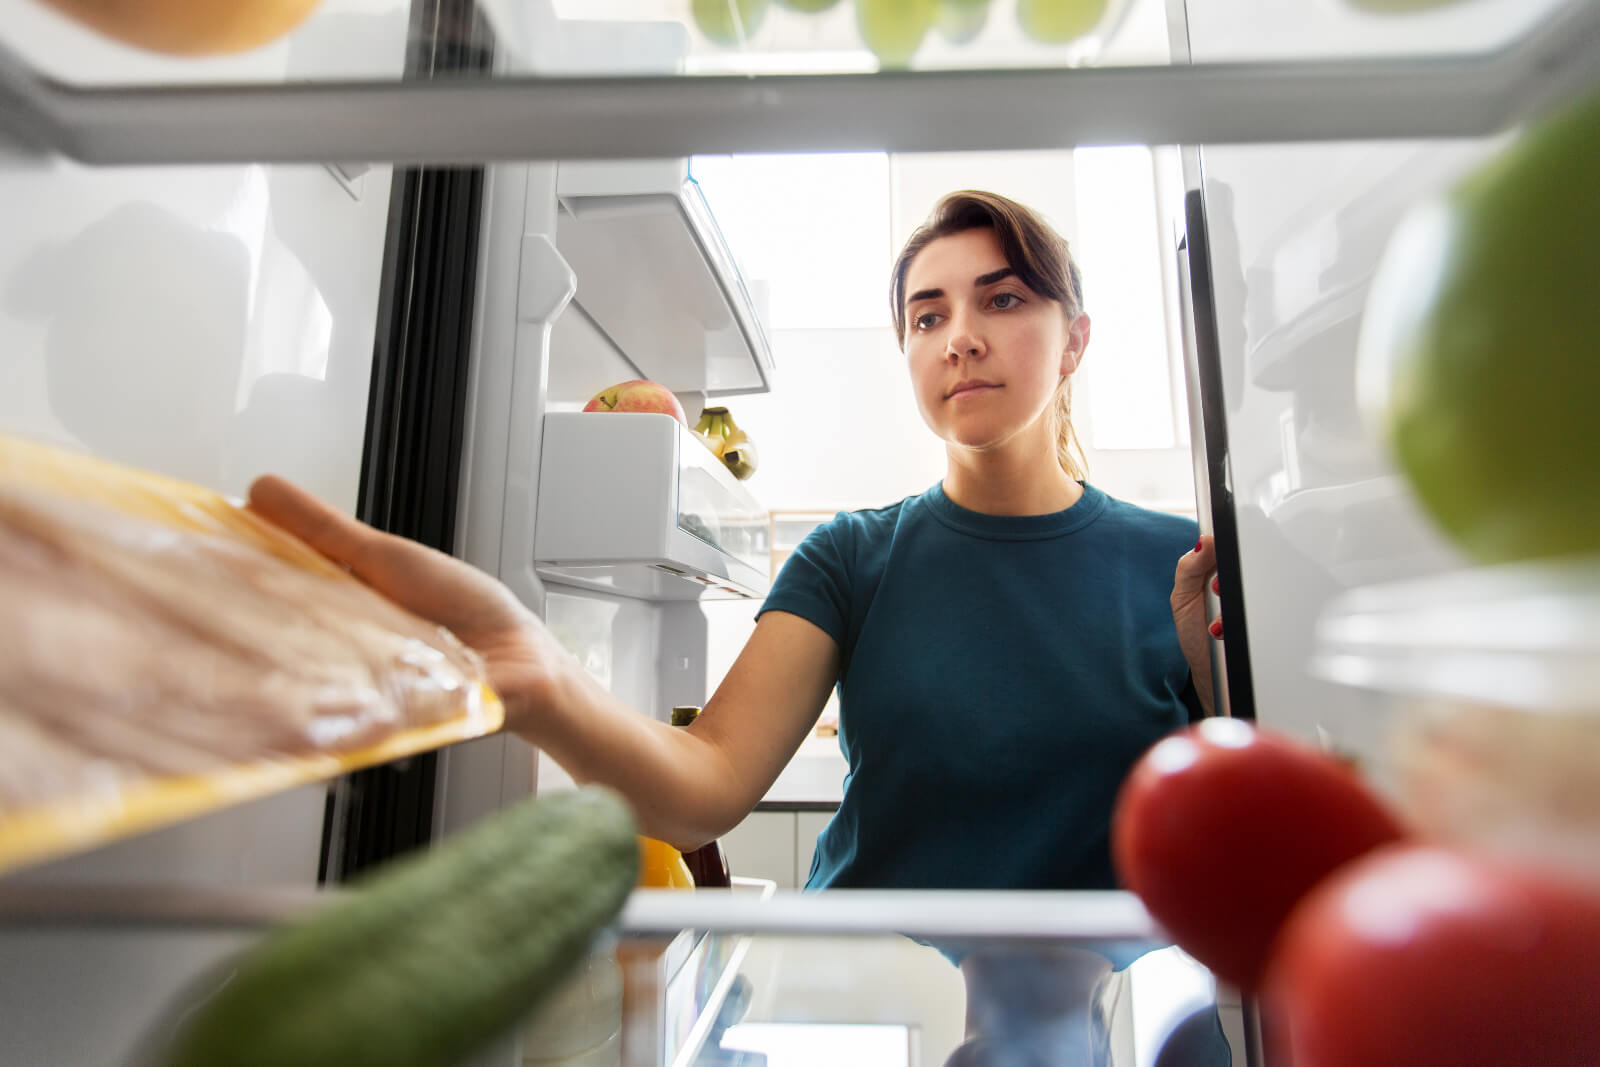 Woman grabbing some food from a refrigerator to illustrate 6 Month diet before weight loss surgery